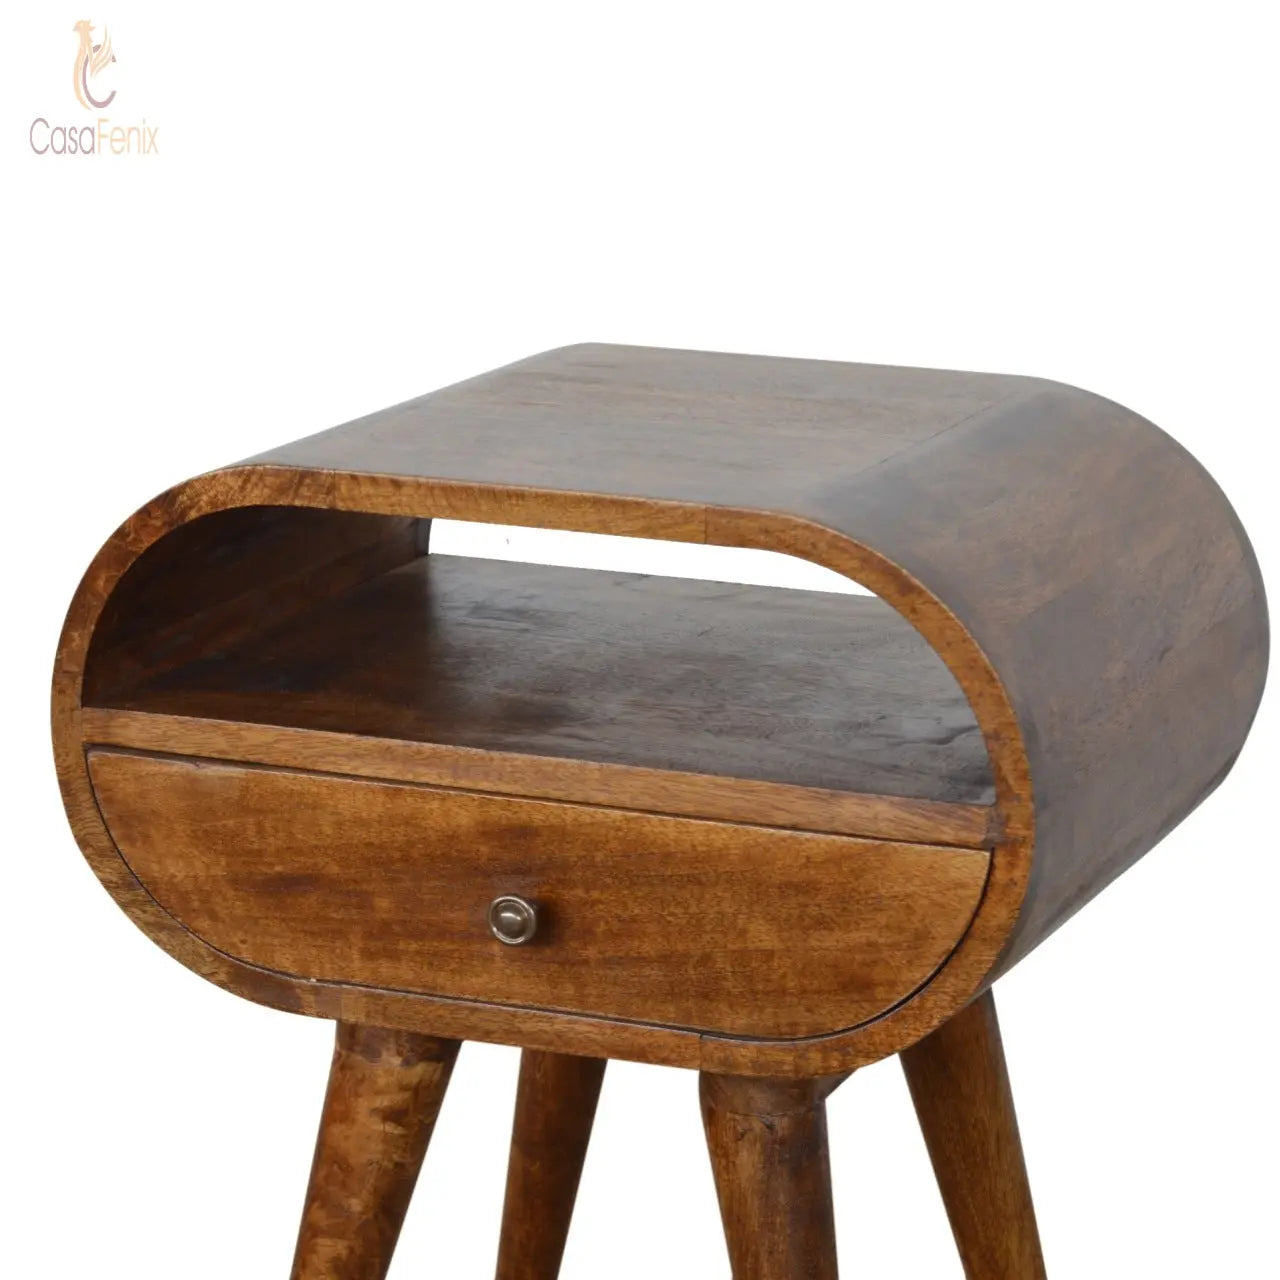 Chestnut Circular Bedside with Open Slot 1 Drawer Chest - CasaFenix